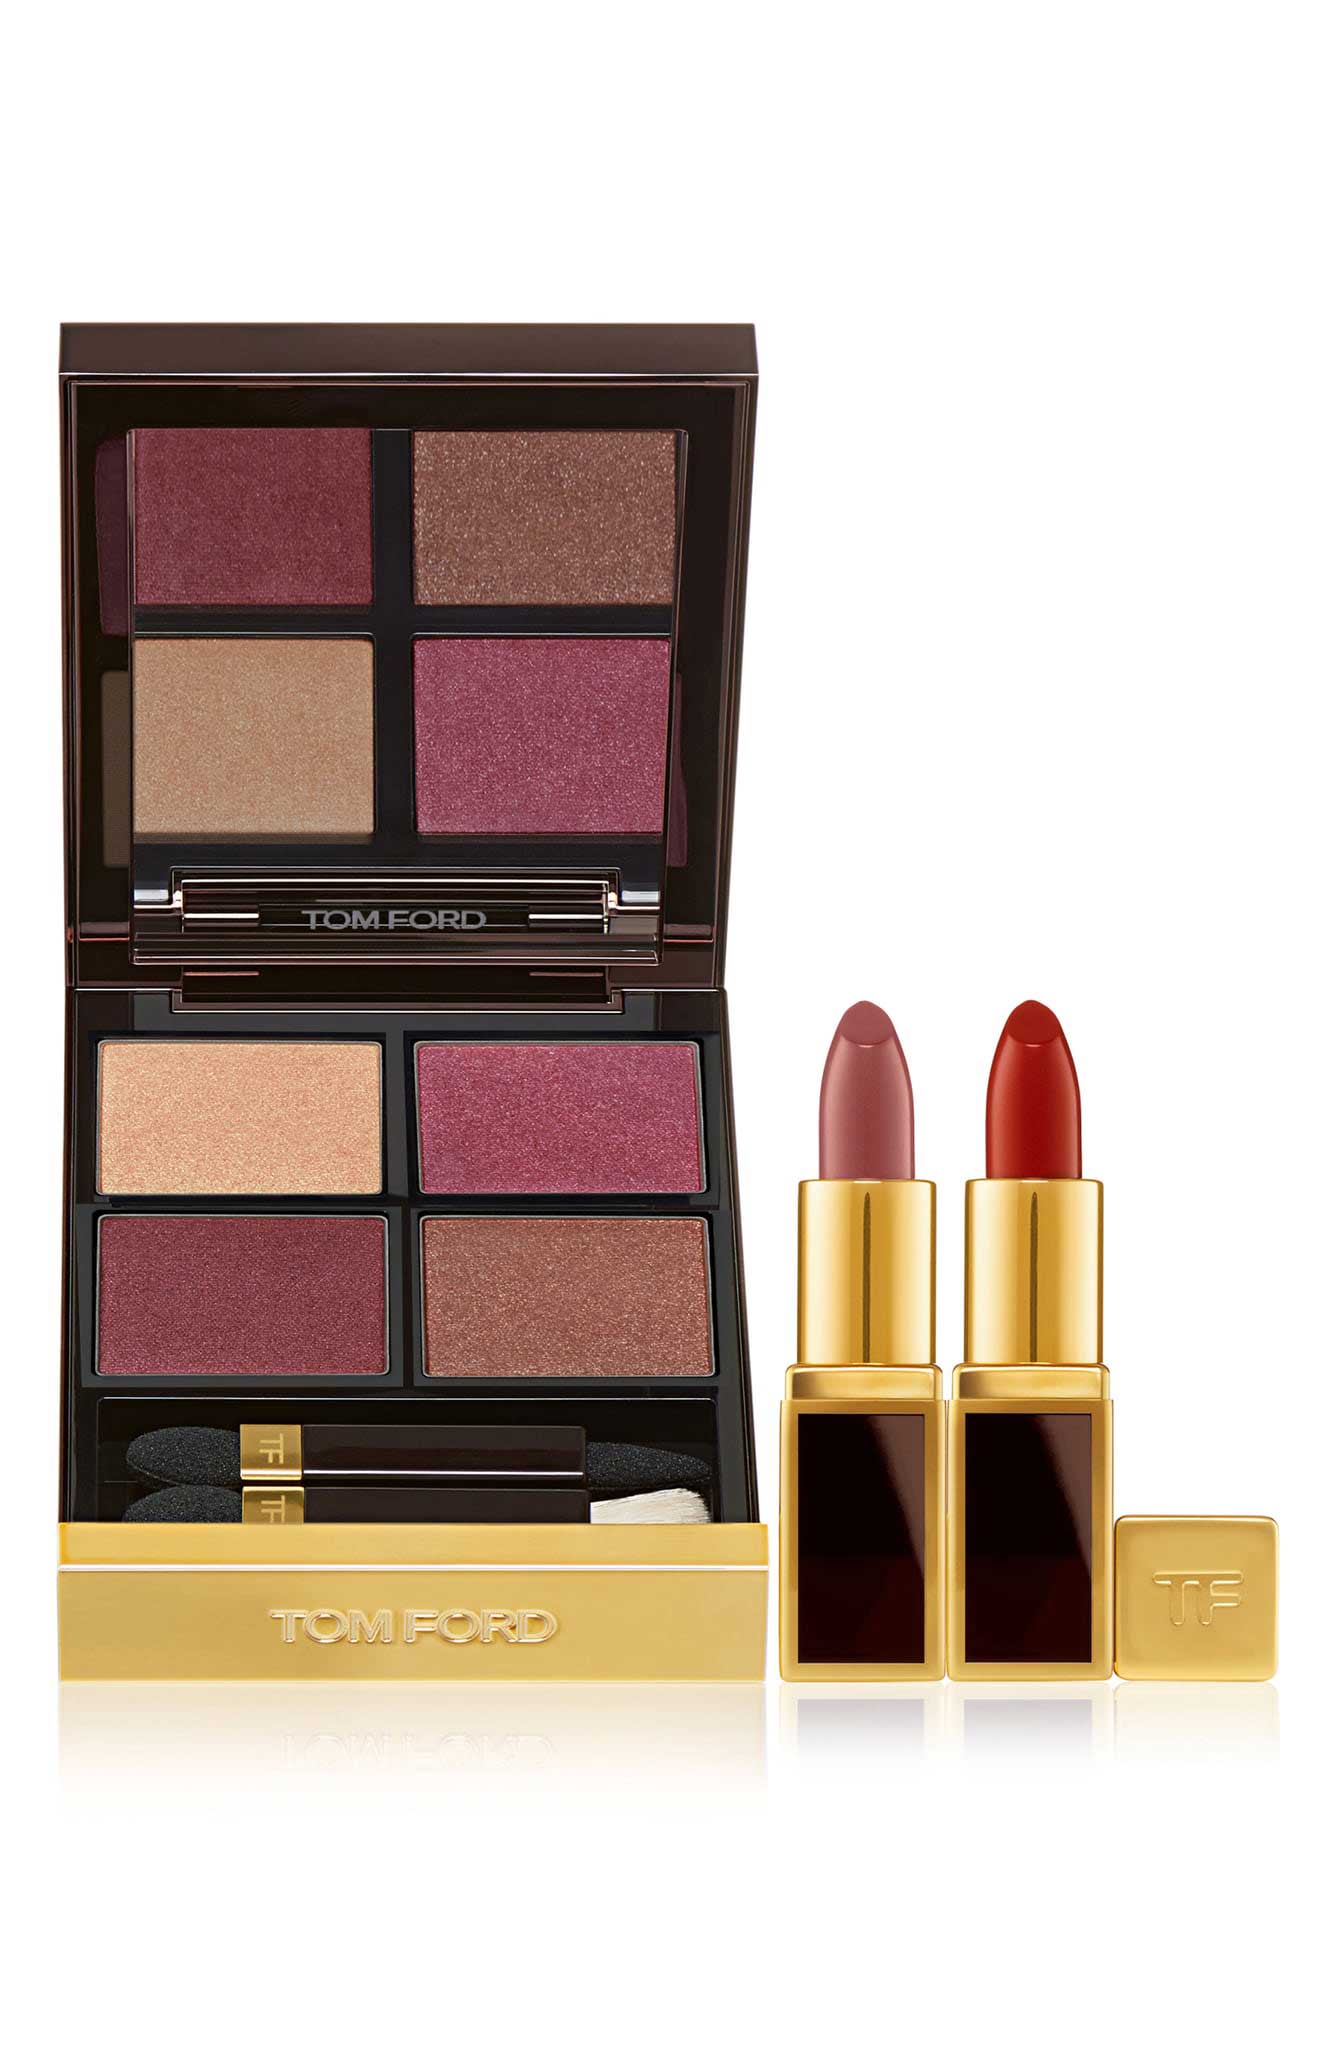 Tom Ford Iconic Lip and eye set: I am sharing my face now more than ever through video chats, so I still like to play up my makeup! This set, launched exclusively for Nordstrom, includes an eye-shadow pallet with 4 shades and has colors you can use to line, highlight or make an impactful smoky eye.